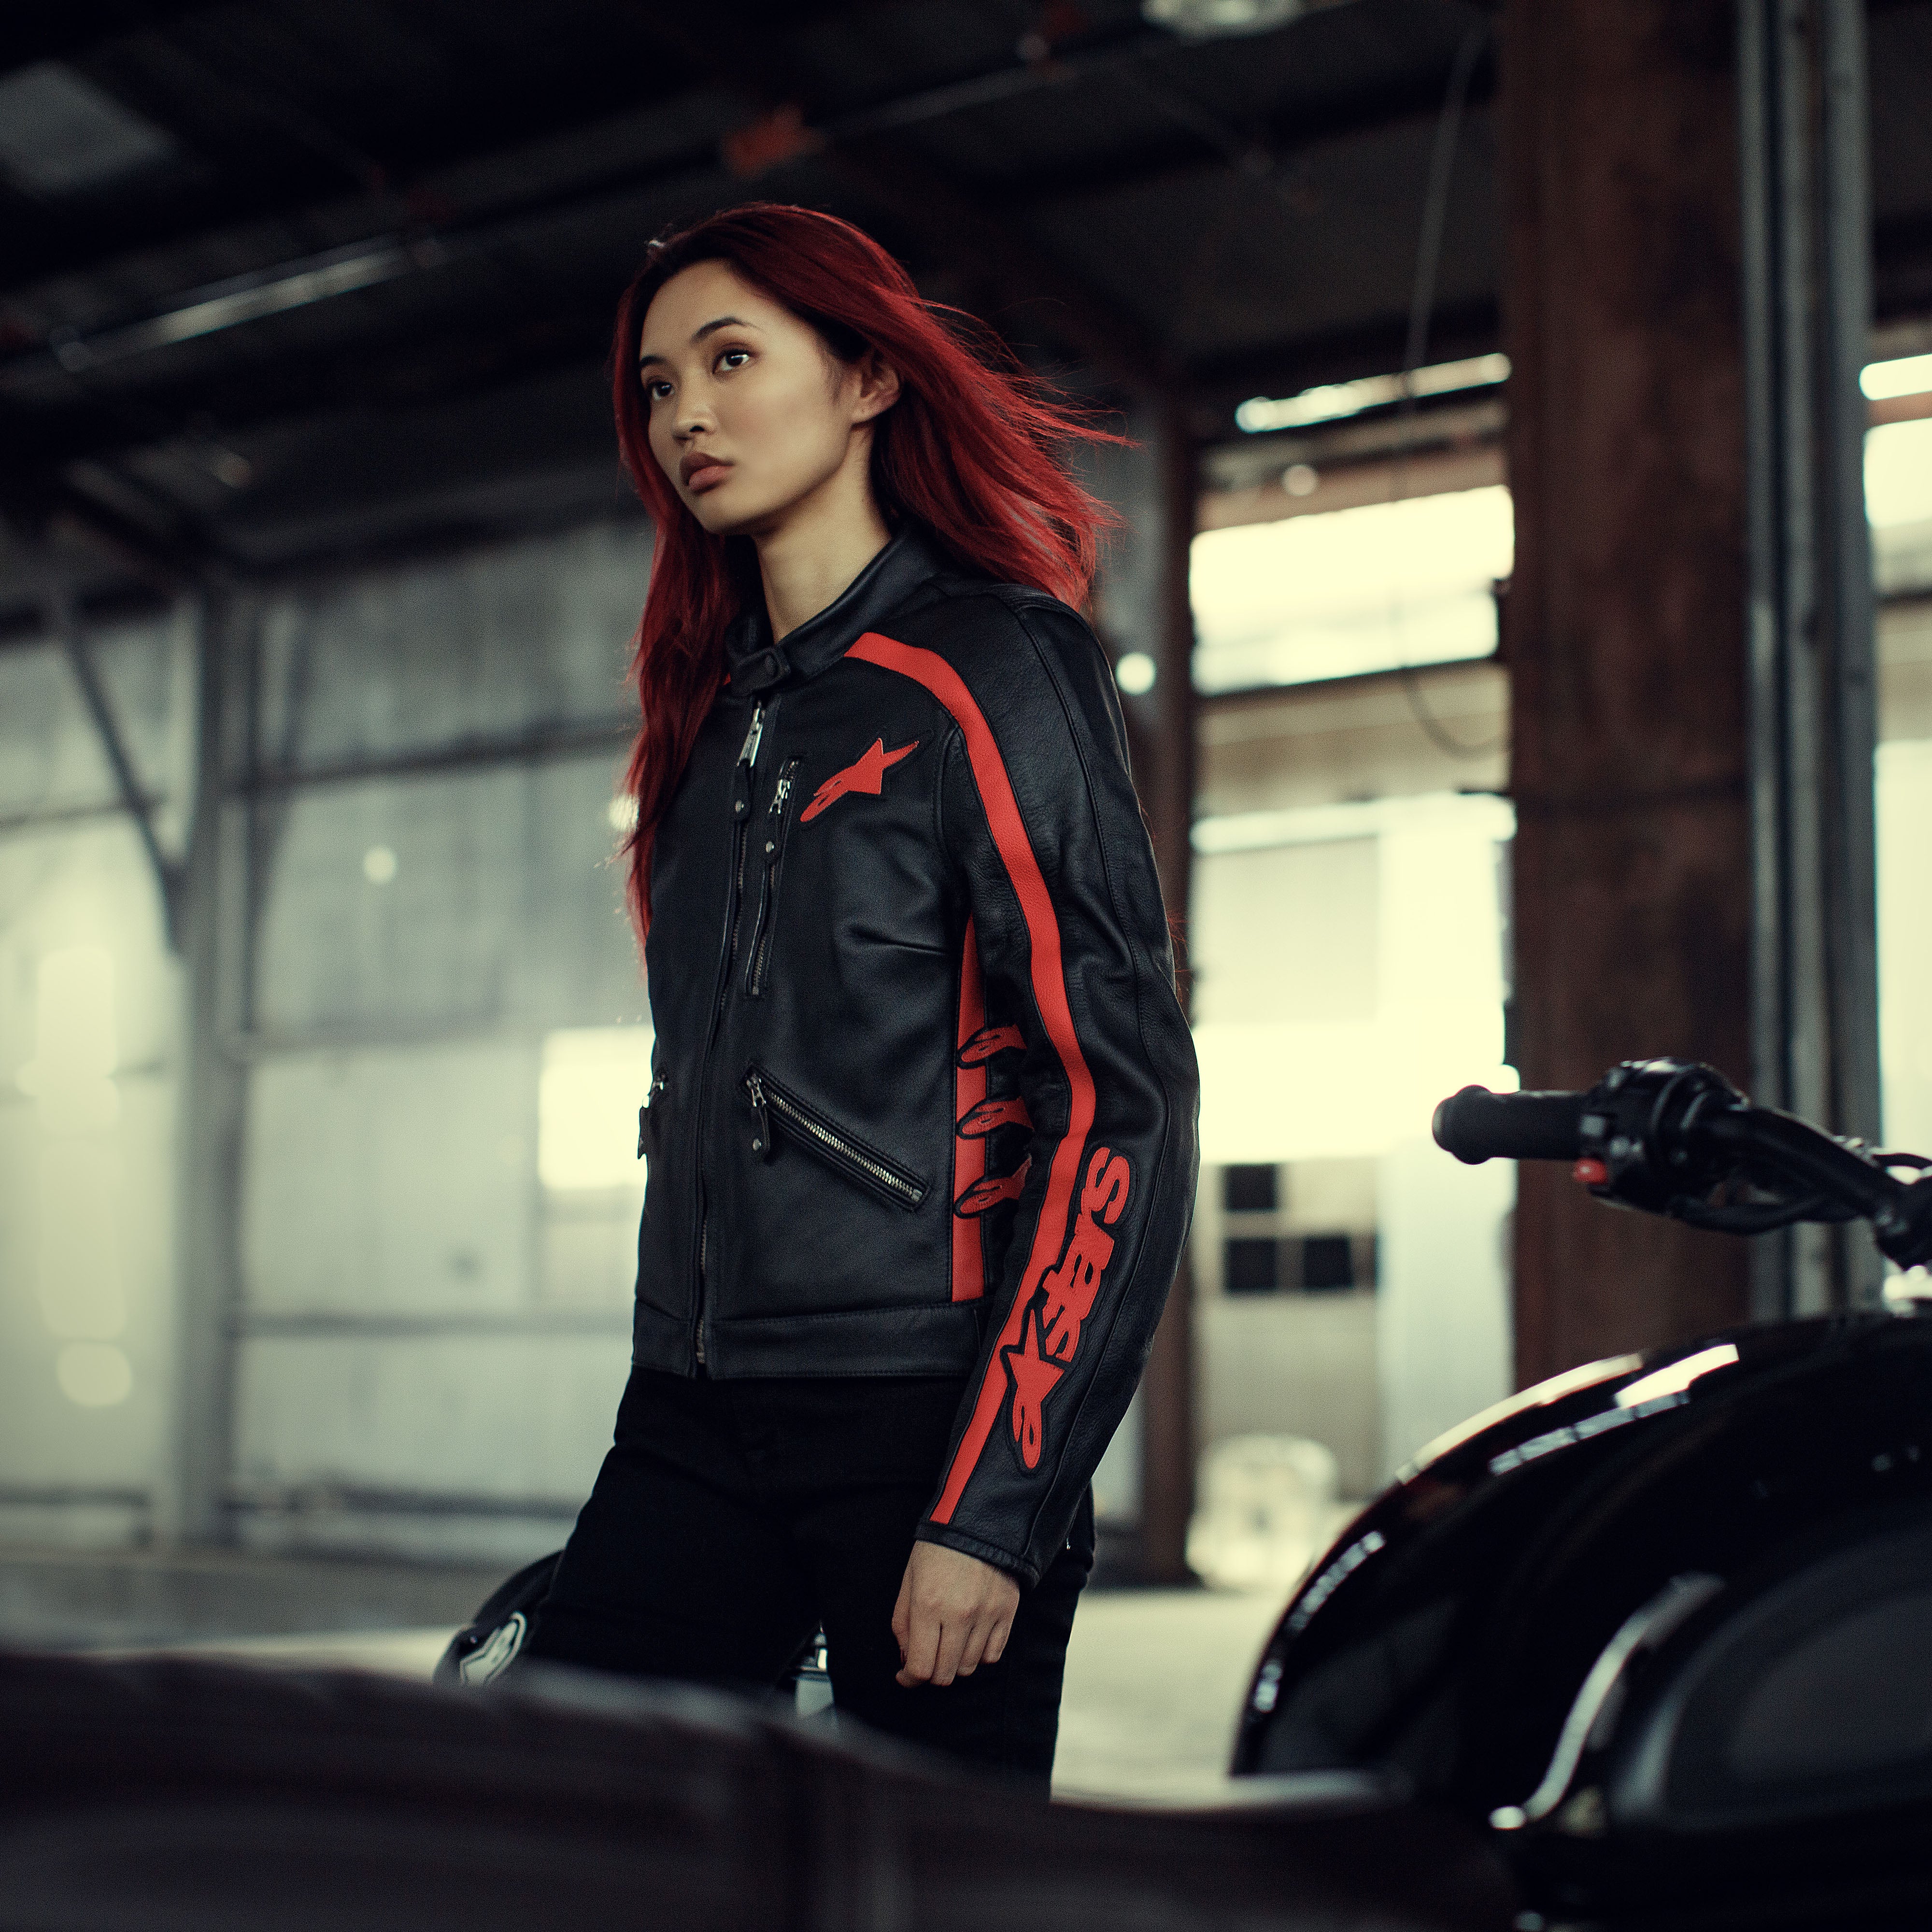 Stella Dyno Leather Jacket | Alpinestars® Official Site